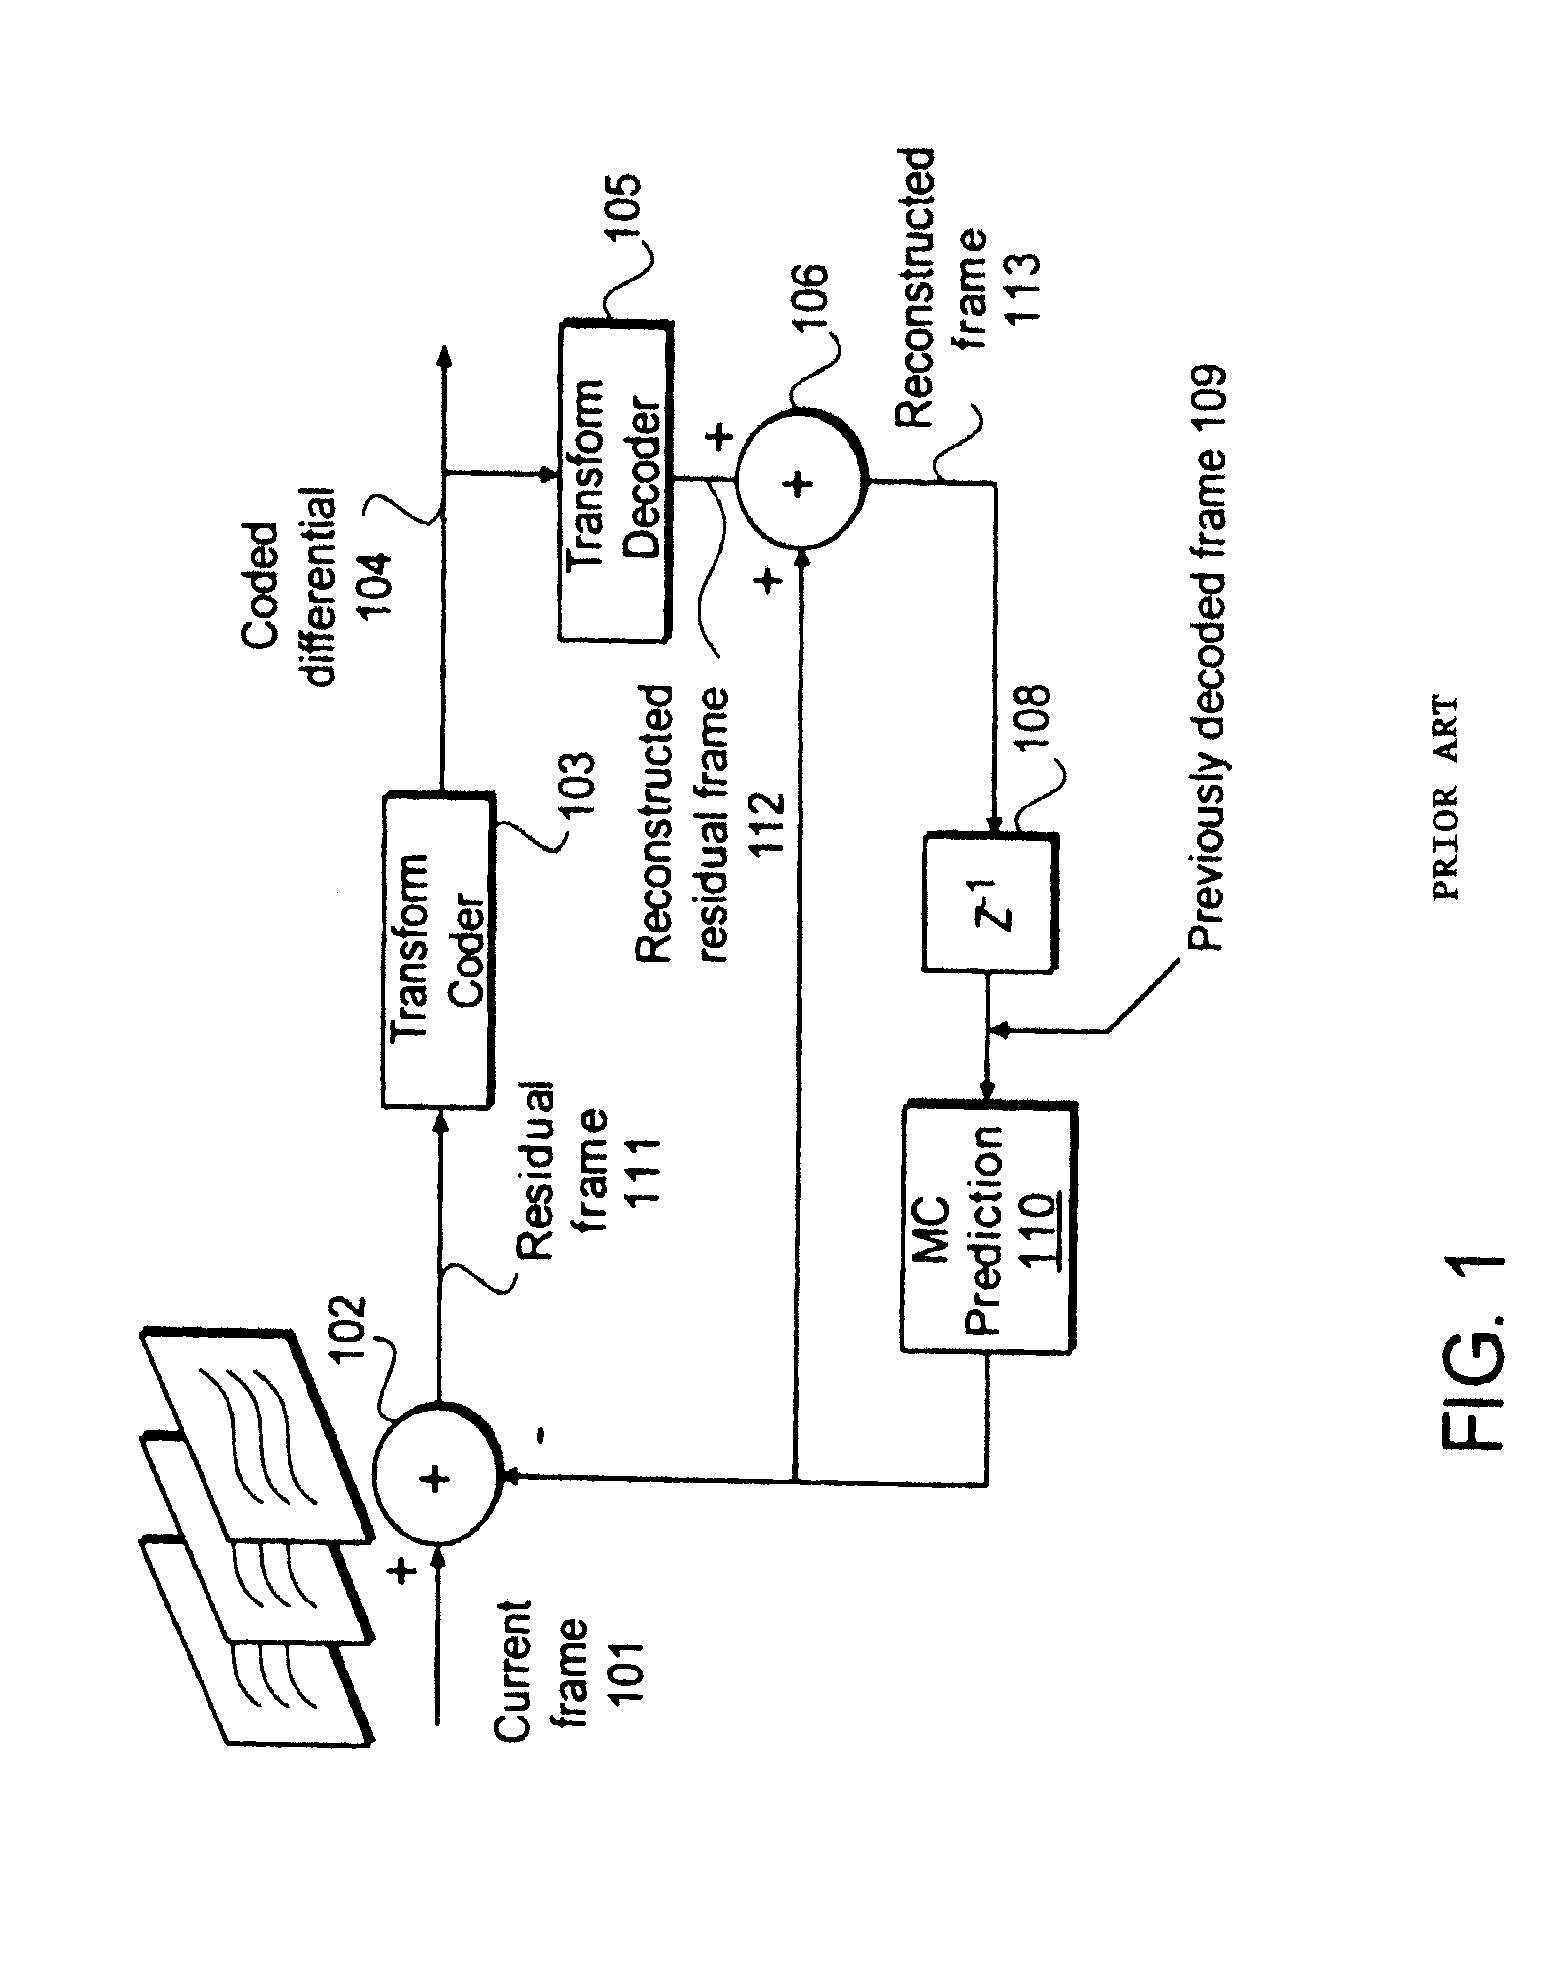 Nonlinear, in-the-loop, denoising filter for quantization noise removal for hybrid video compression